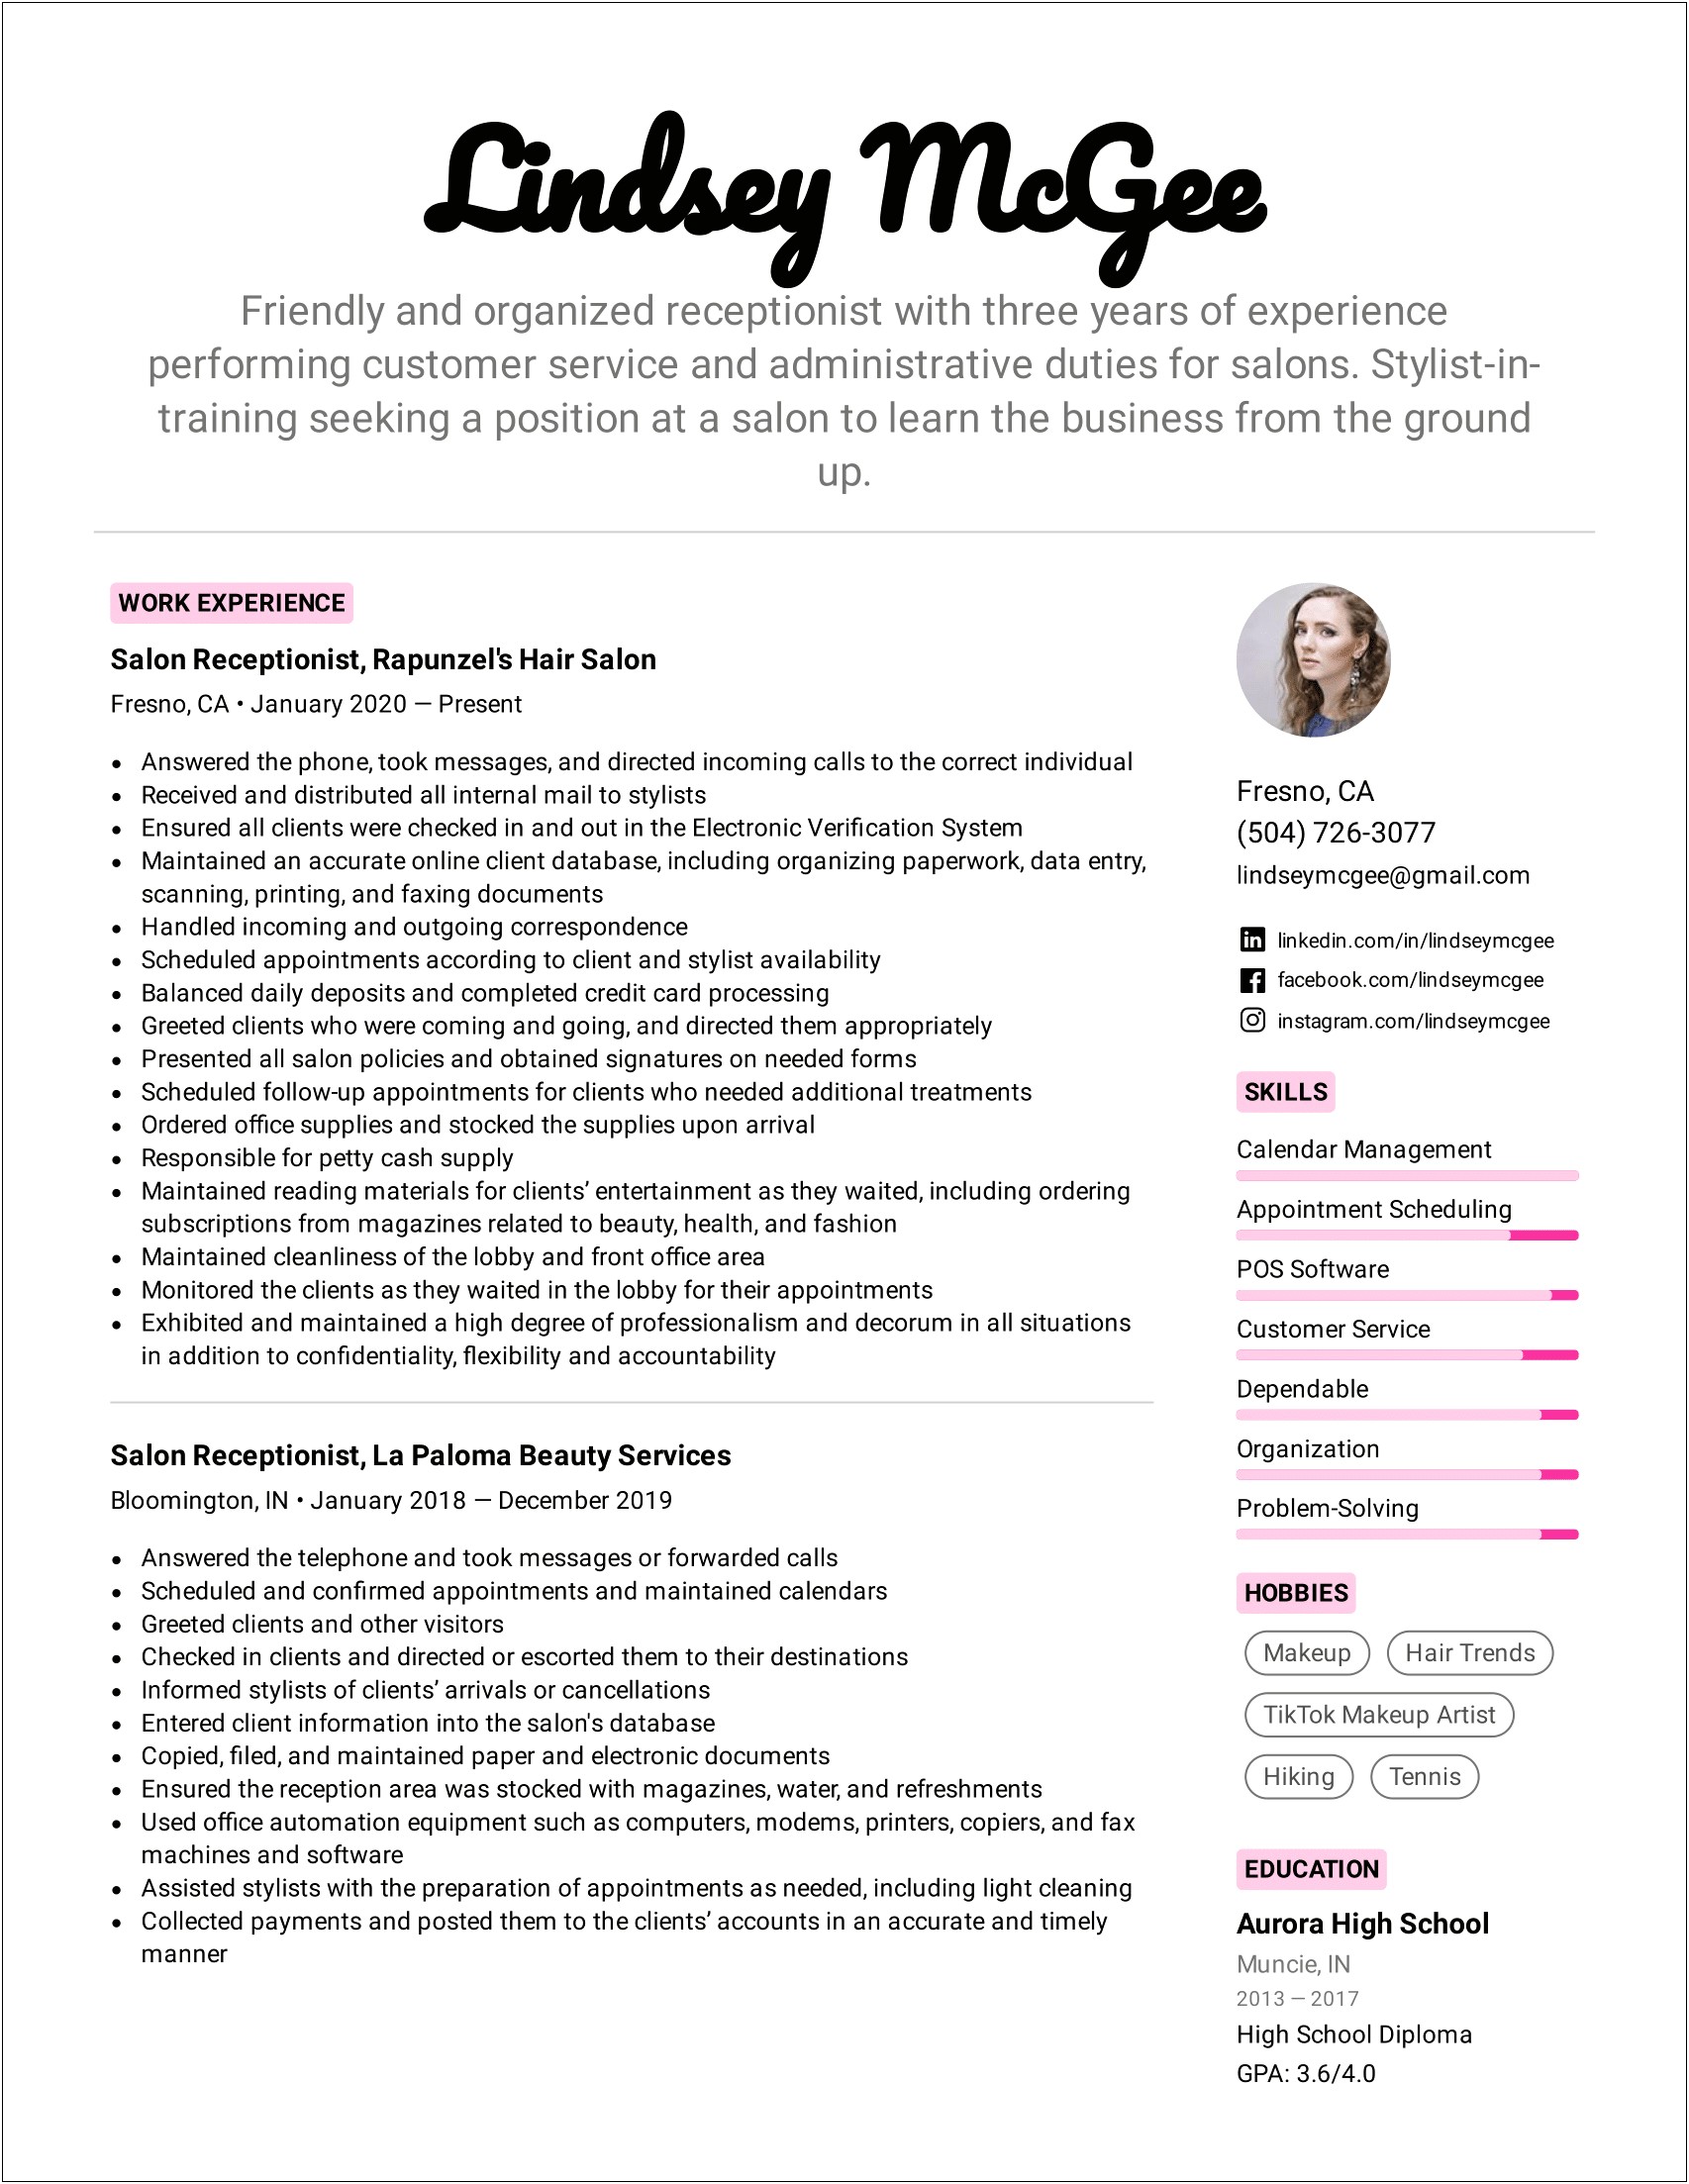 Sample Resume Objective Statements For Receptionist